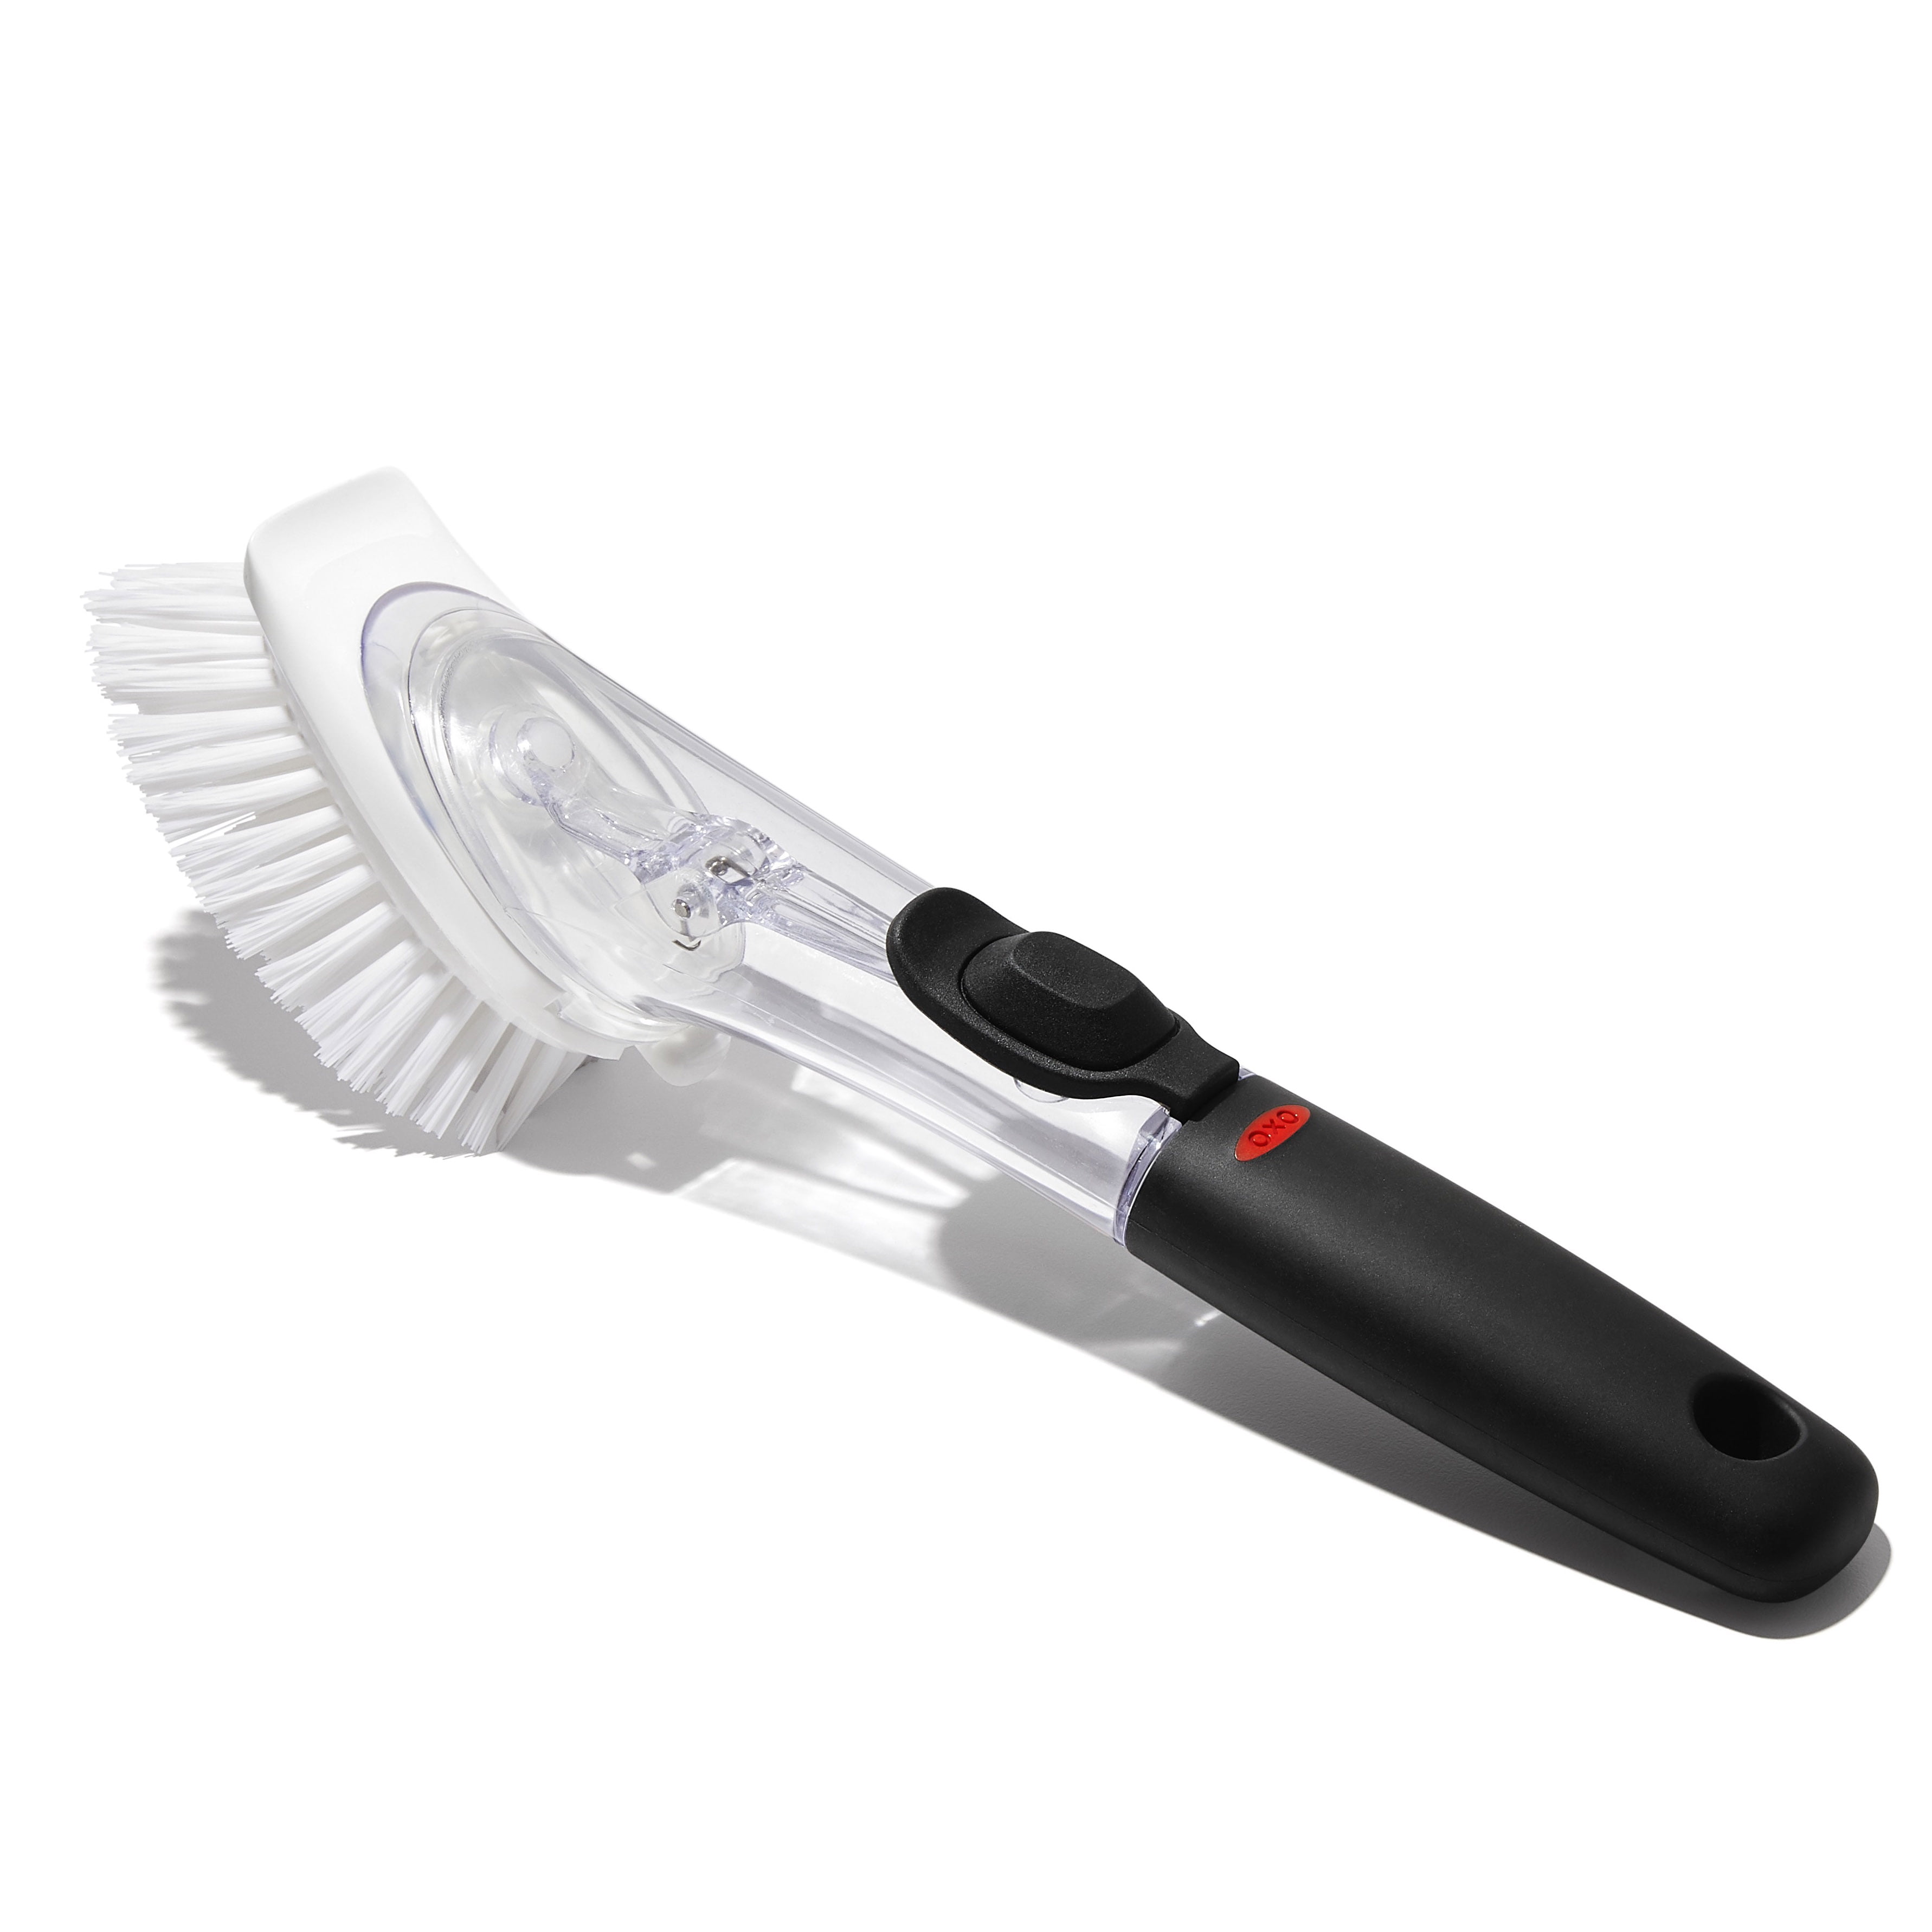 OXO Softworks Soap Dispensing Dish Cleaning Brush 